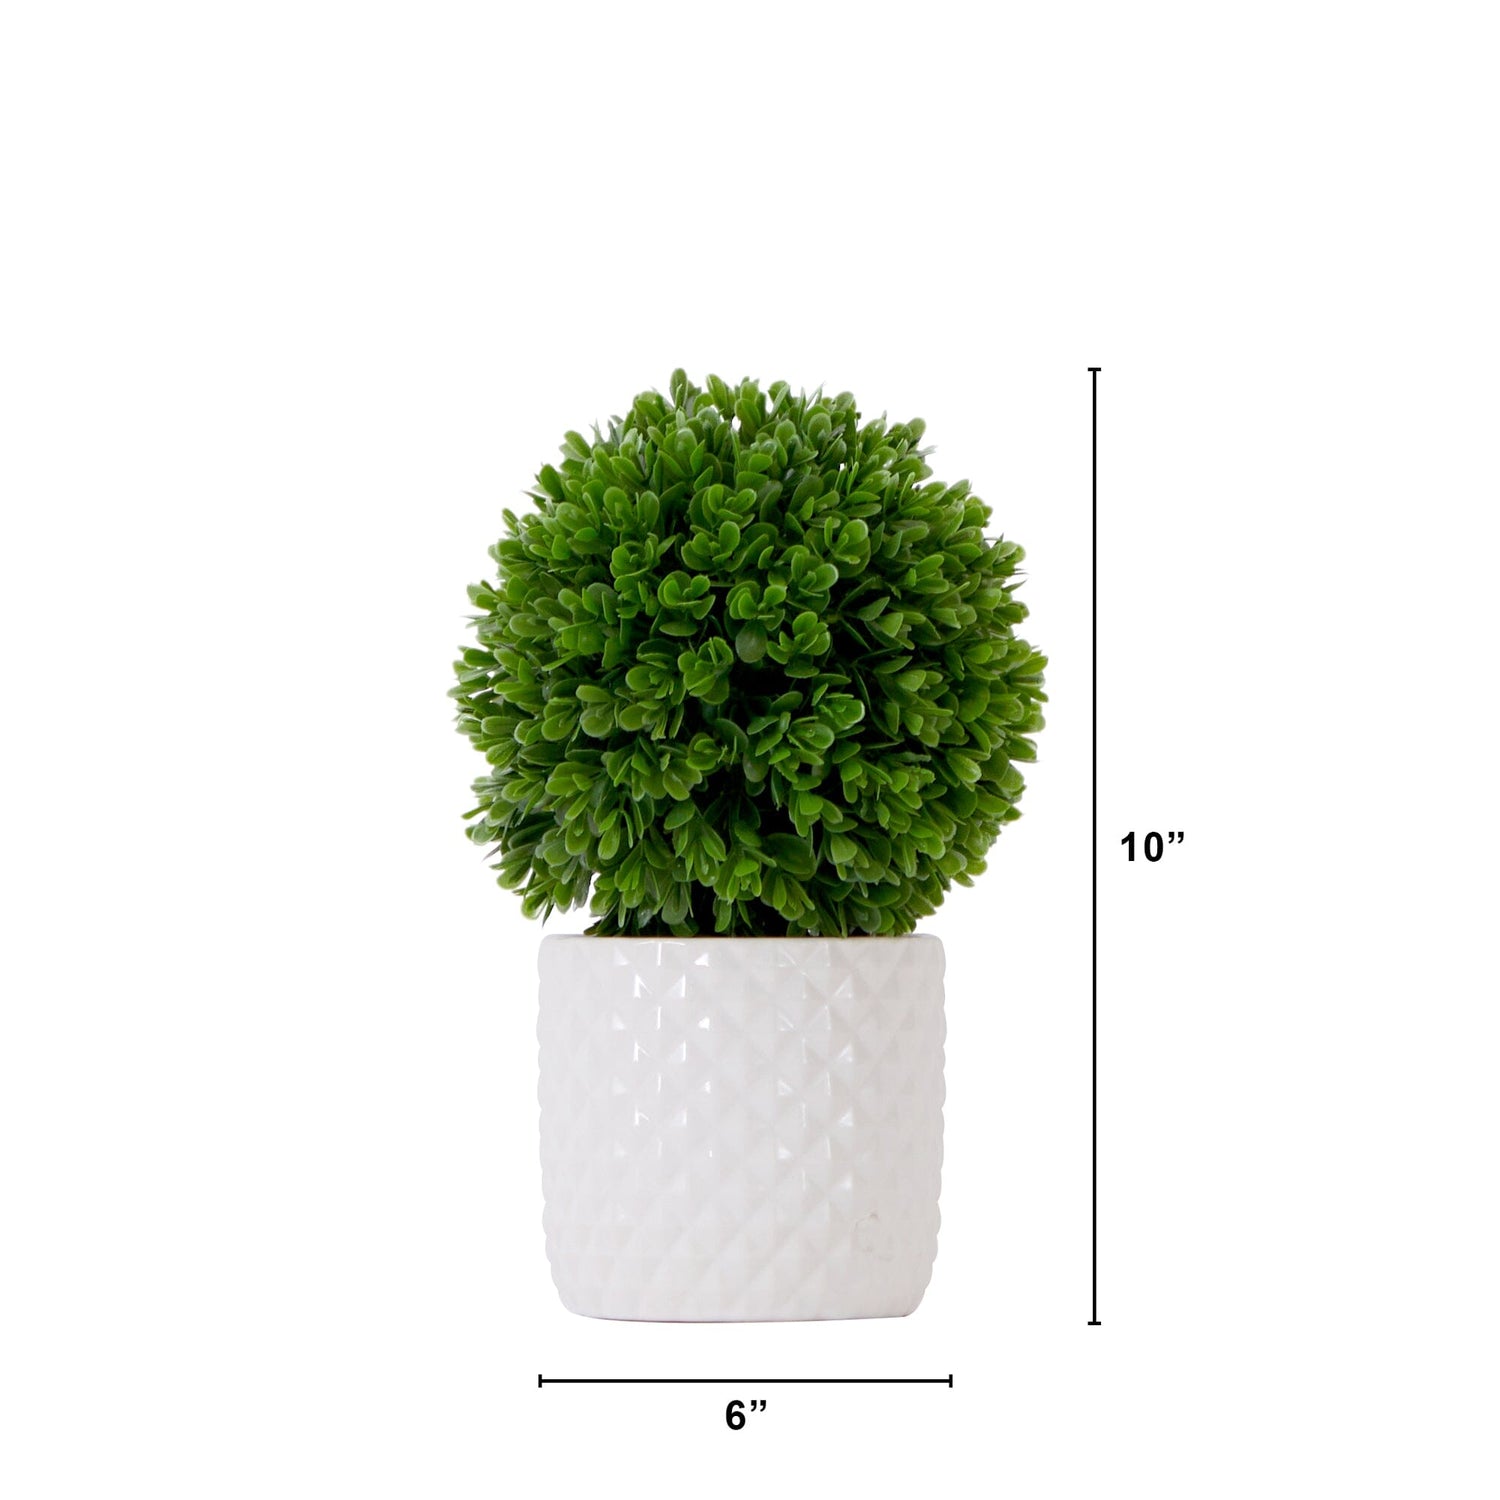 10" Artificial Boxwood Topiary Plant with Decorative Planter